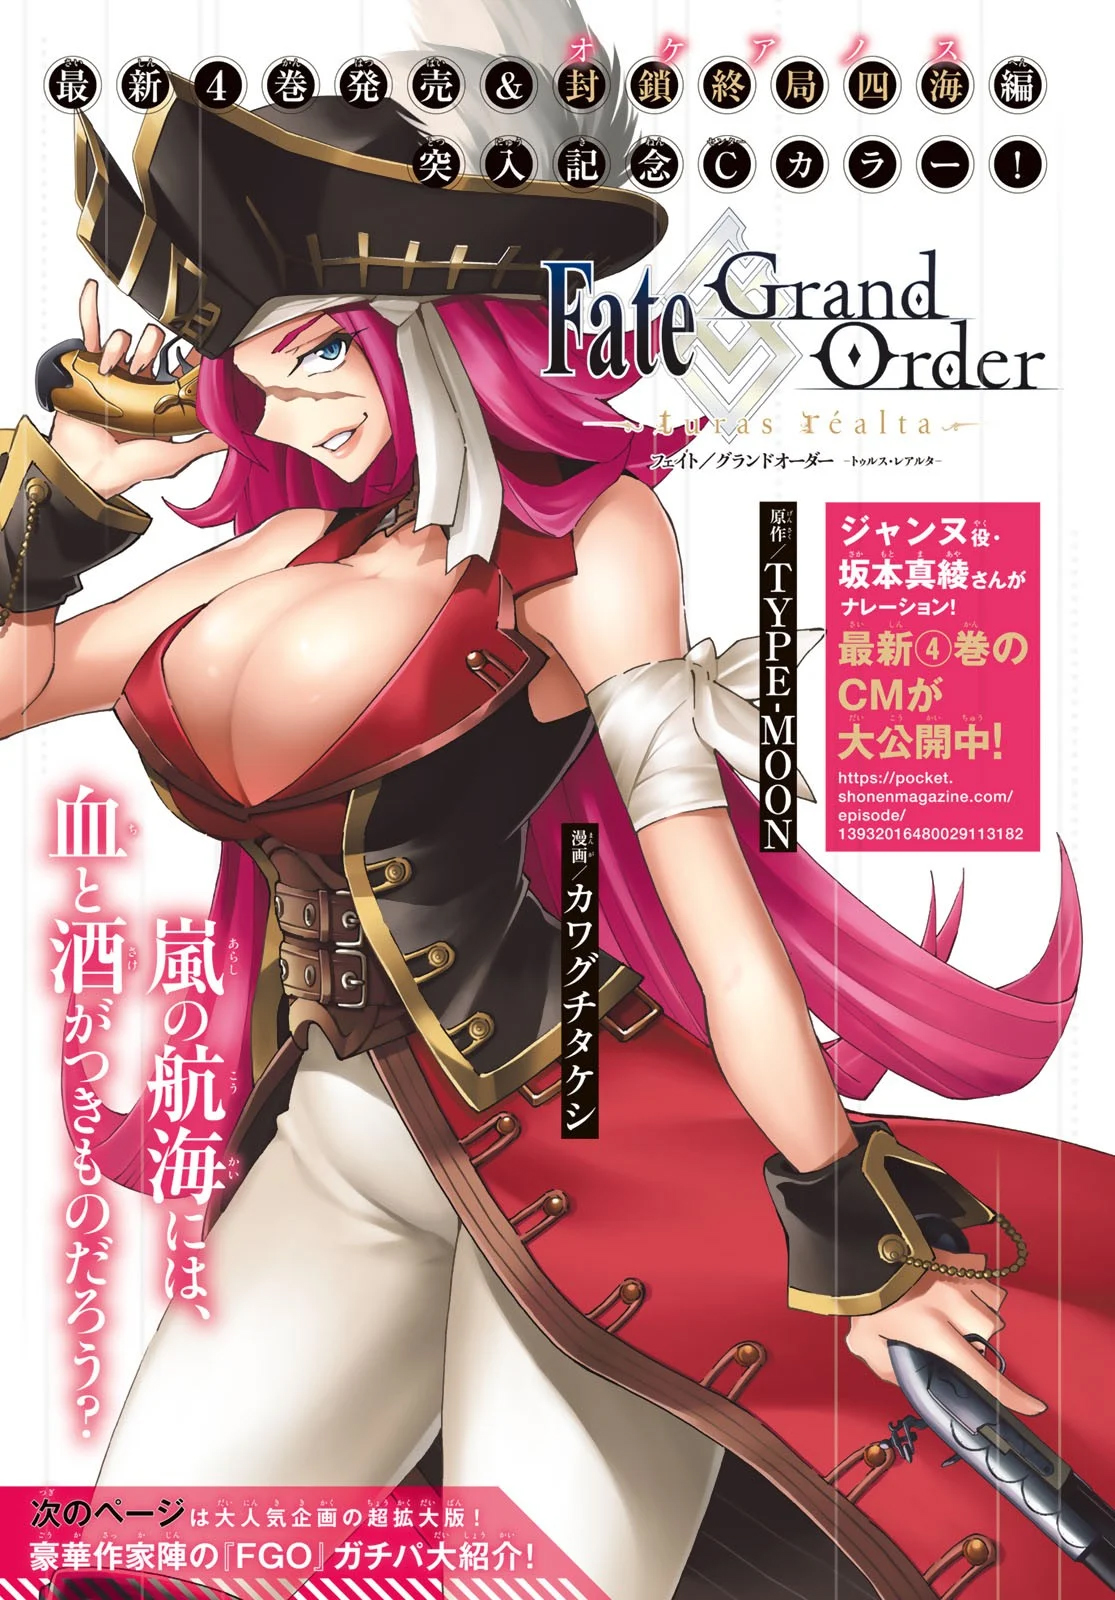 Fate/grand Order -Turas Réalta- Vol.5 Chapter 20: Third Singularity 1 - Picture 2